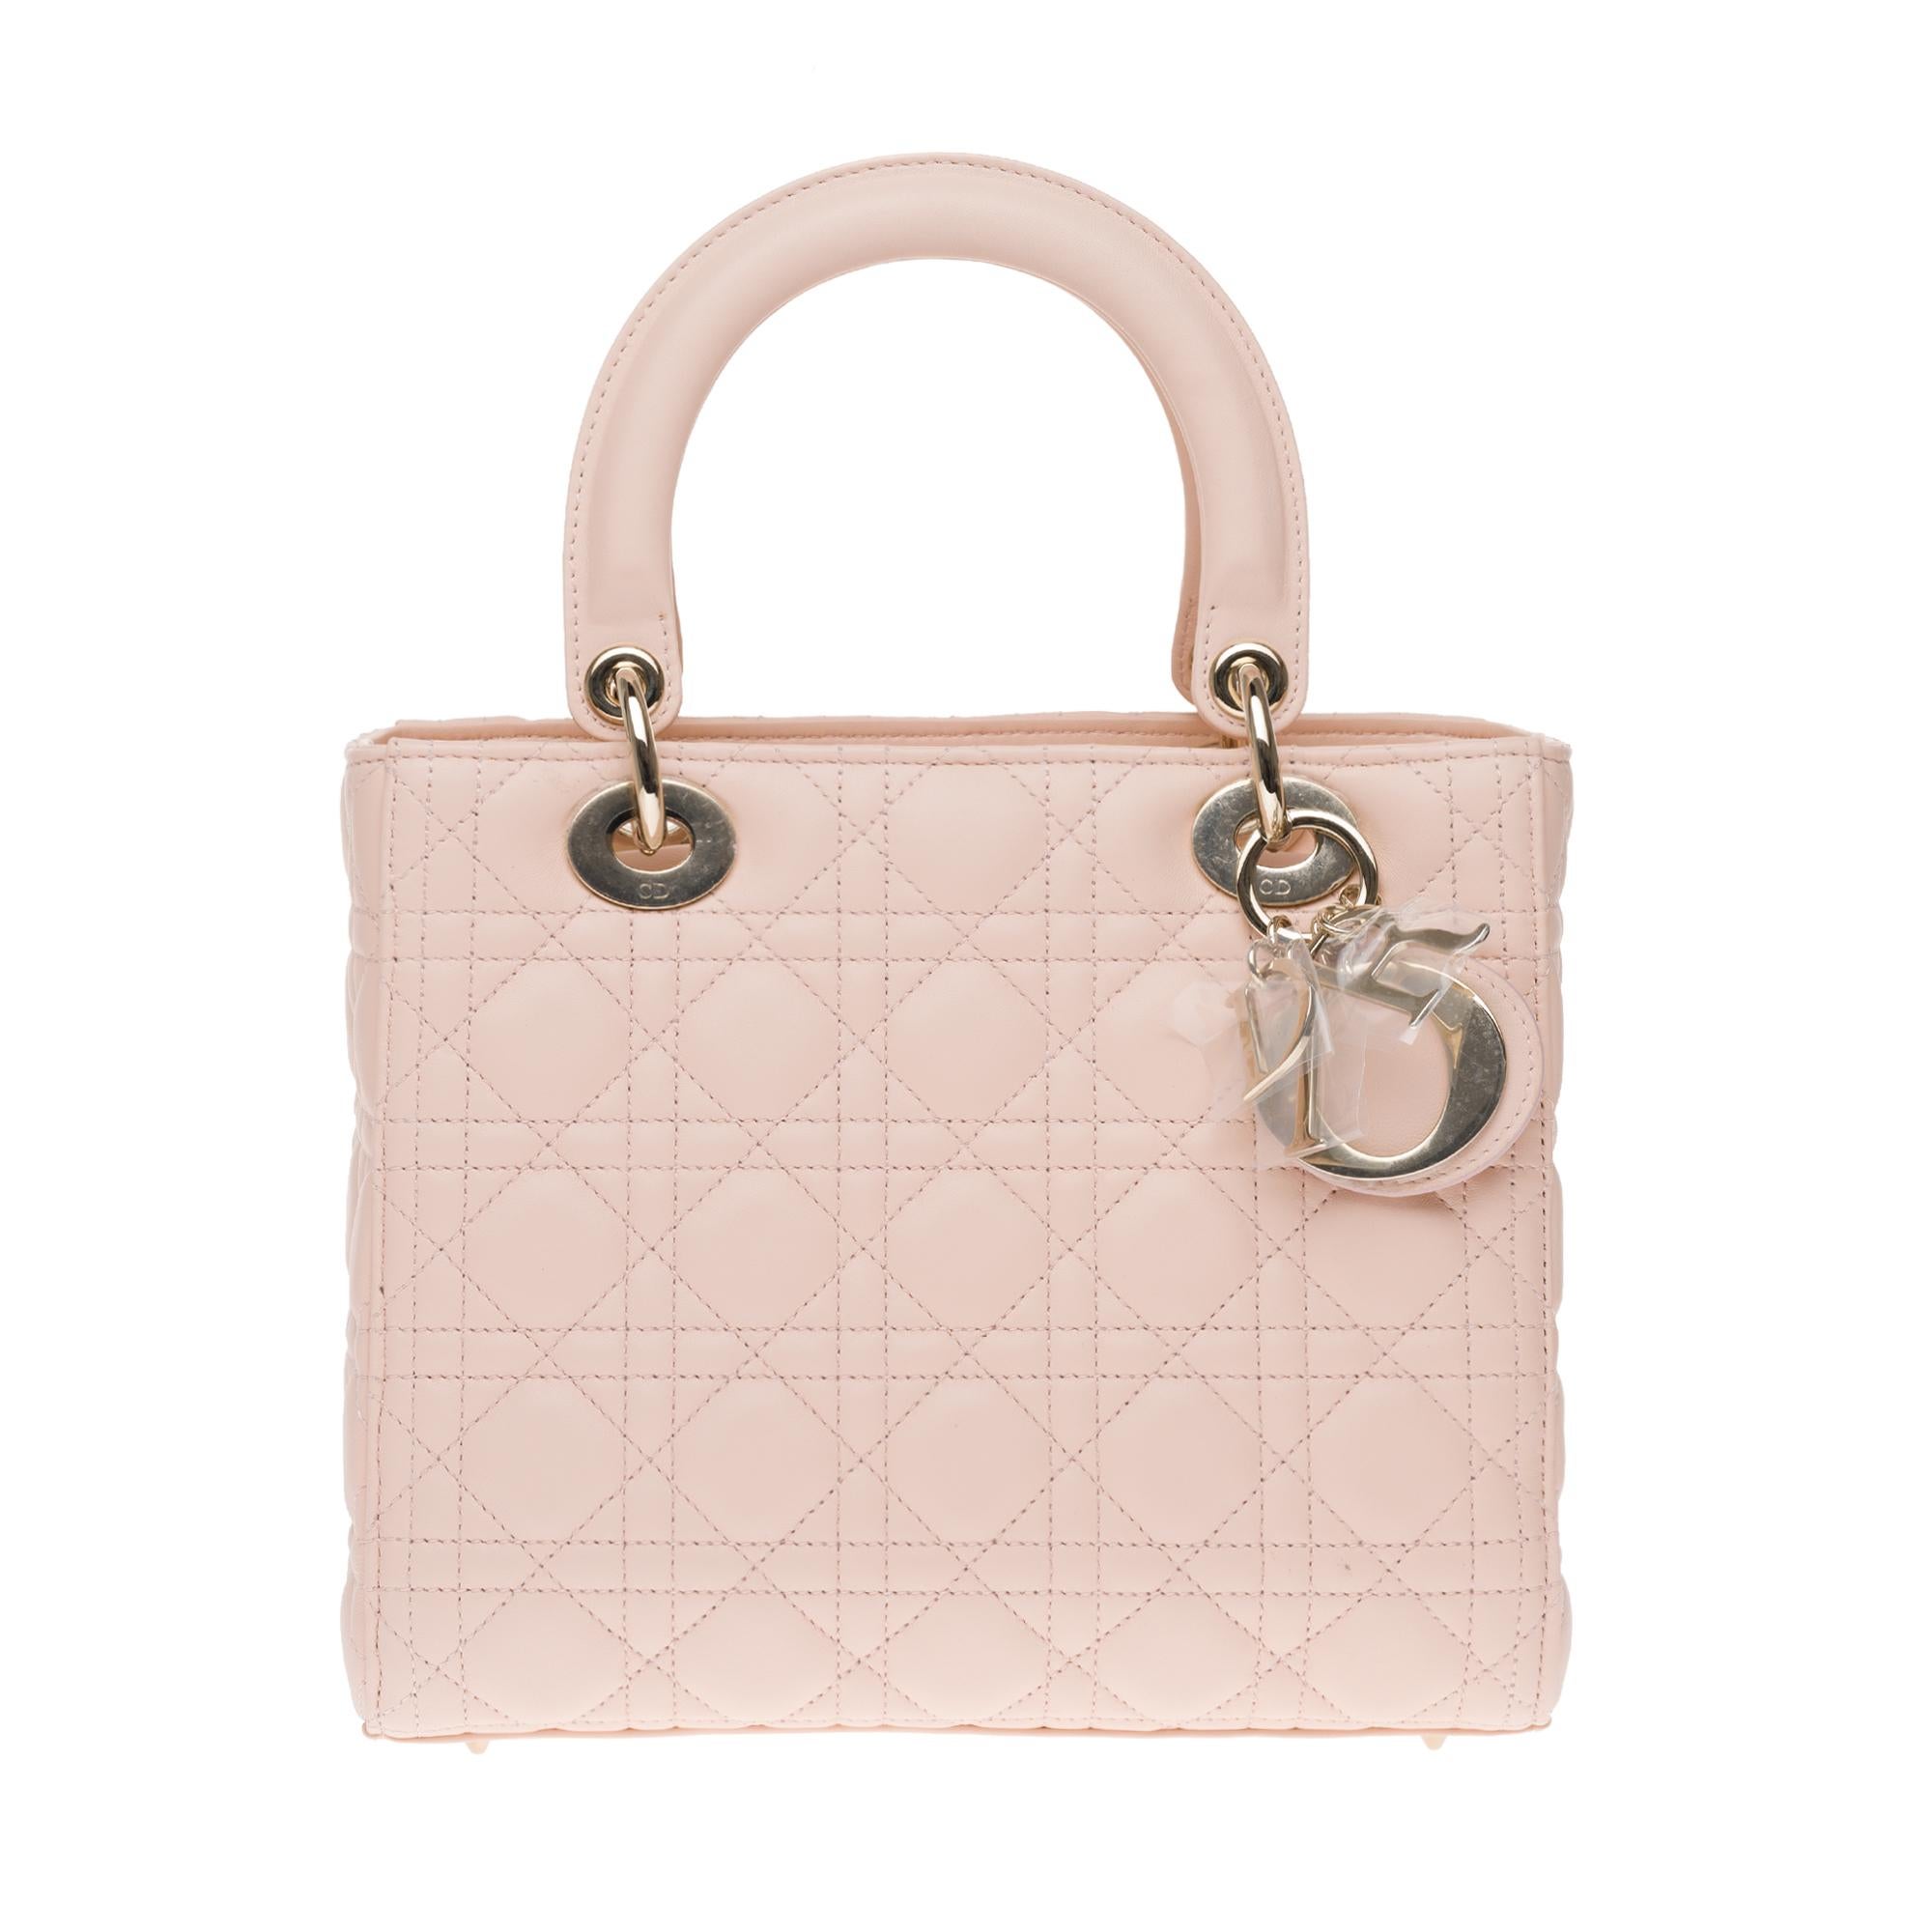 The very Classy shoulder bag Dior Lady Dior medium model in pink cannage leather, silver metal trim, double handle in pink leather, removable shoulder strap handle in pink leather allowing a hand or shoulder support or shoulder strap.

It’s a zip